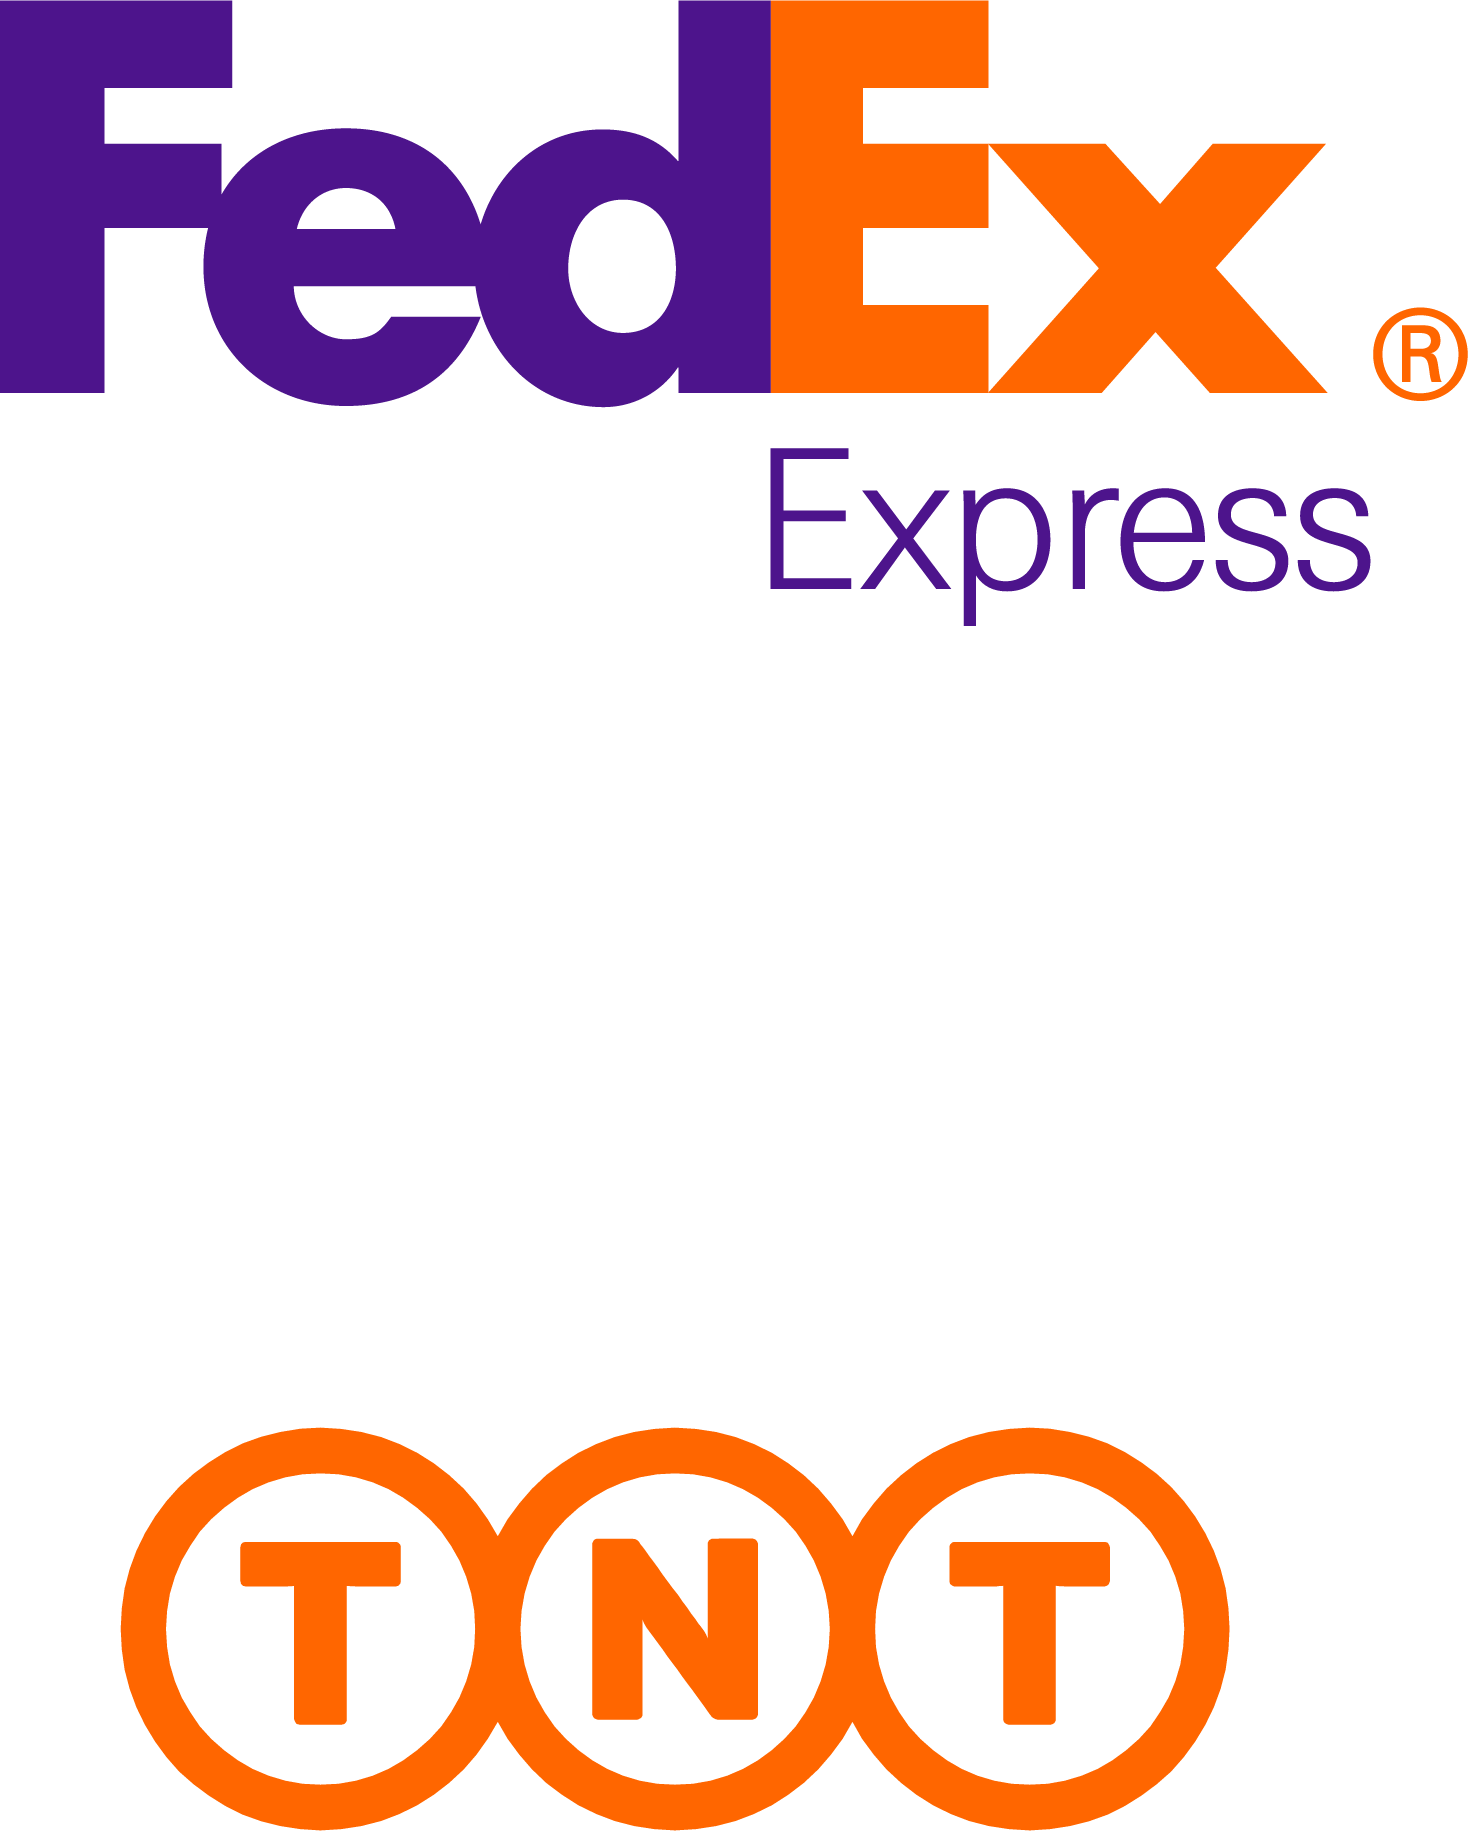 Fed Exand T N T Logos PNG